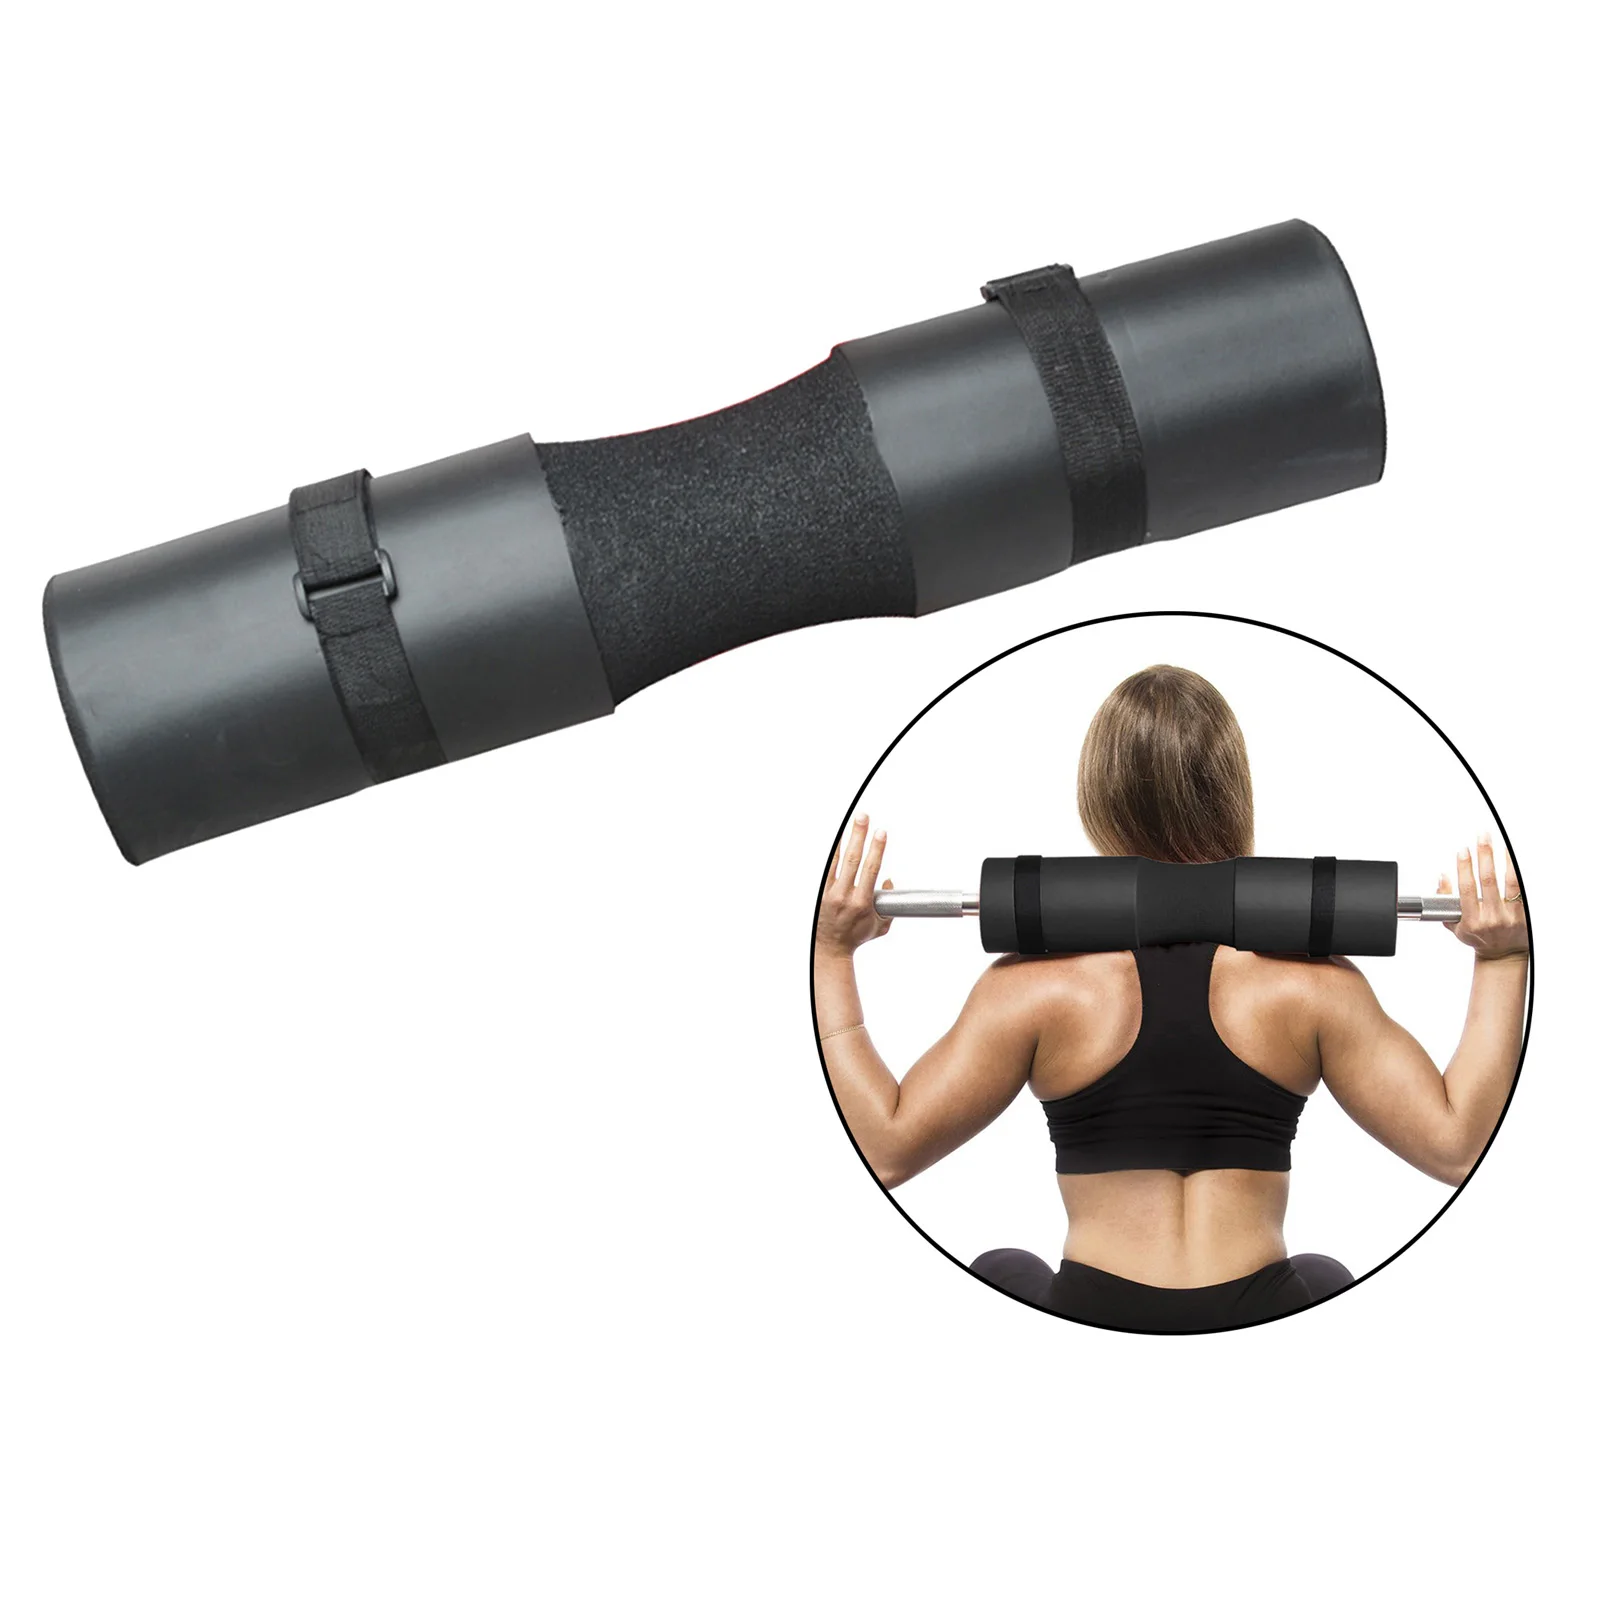 Sci Force Barbell Pad Squat Bar Padding Foam Weight Lifting Hip Thrust Gym Home 